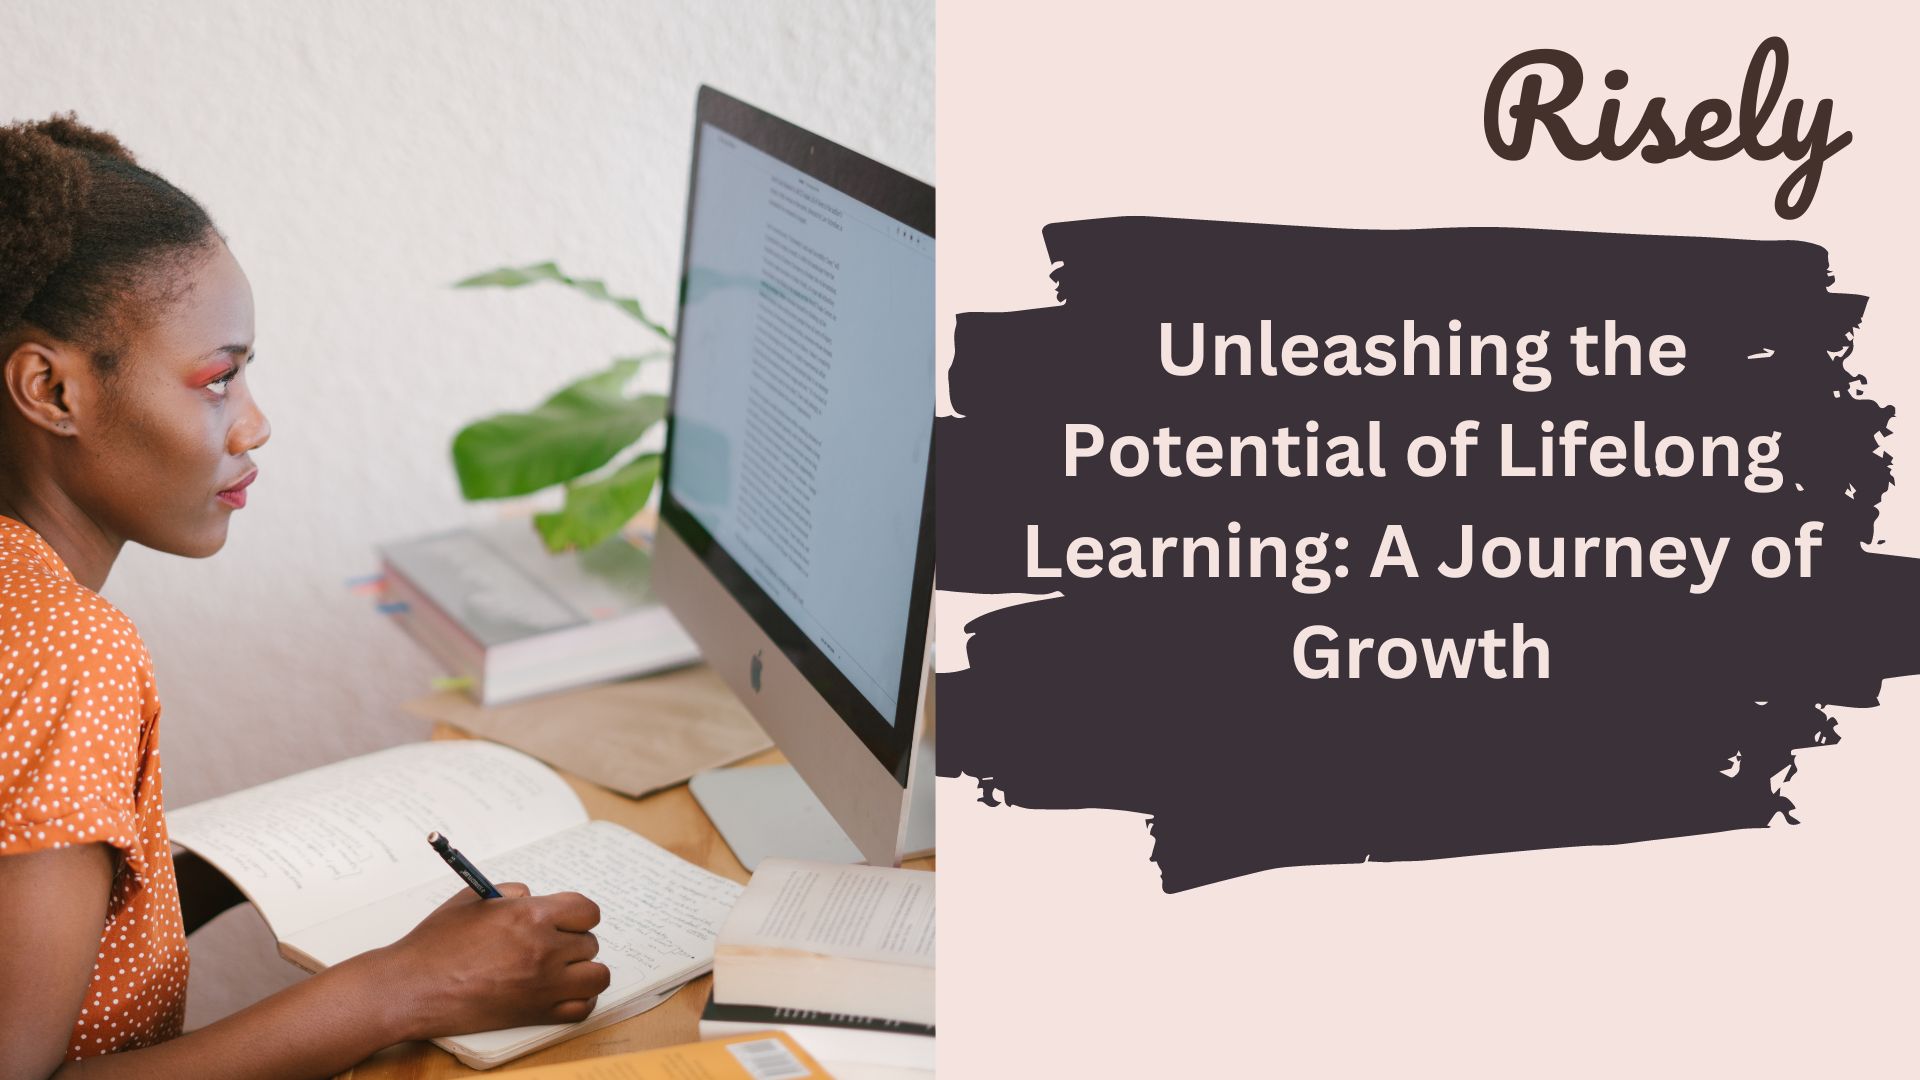 Unleashing the Potential of Lifelong Learning: A Journey of Growth